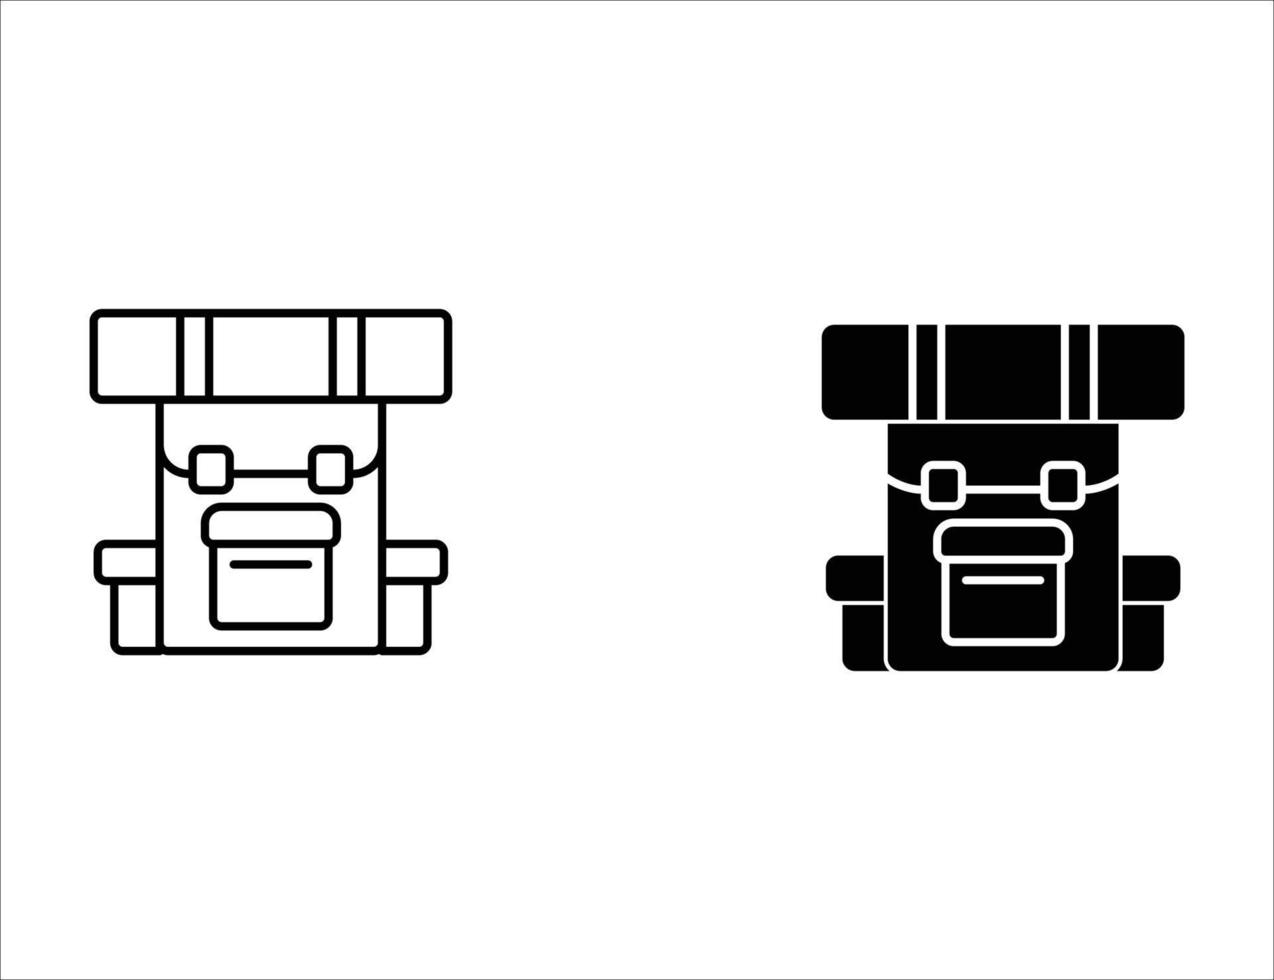 backpack icon.outline icon and solid icon vector